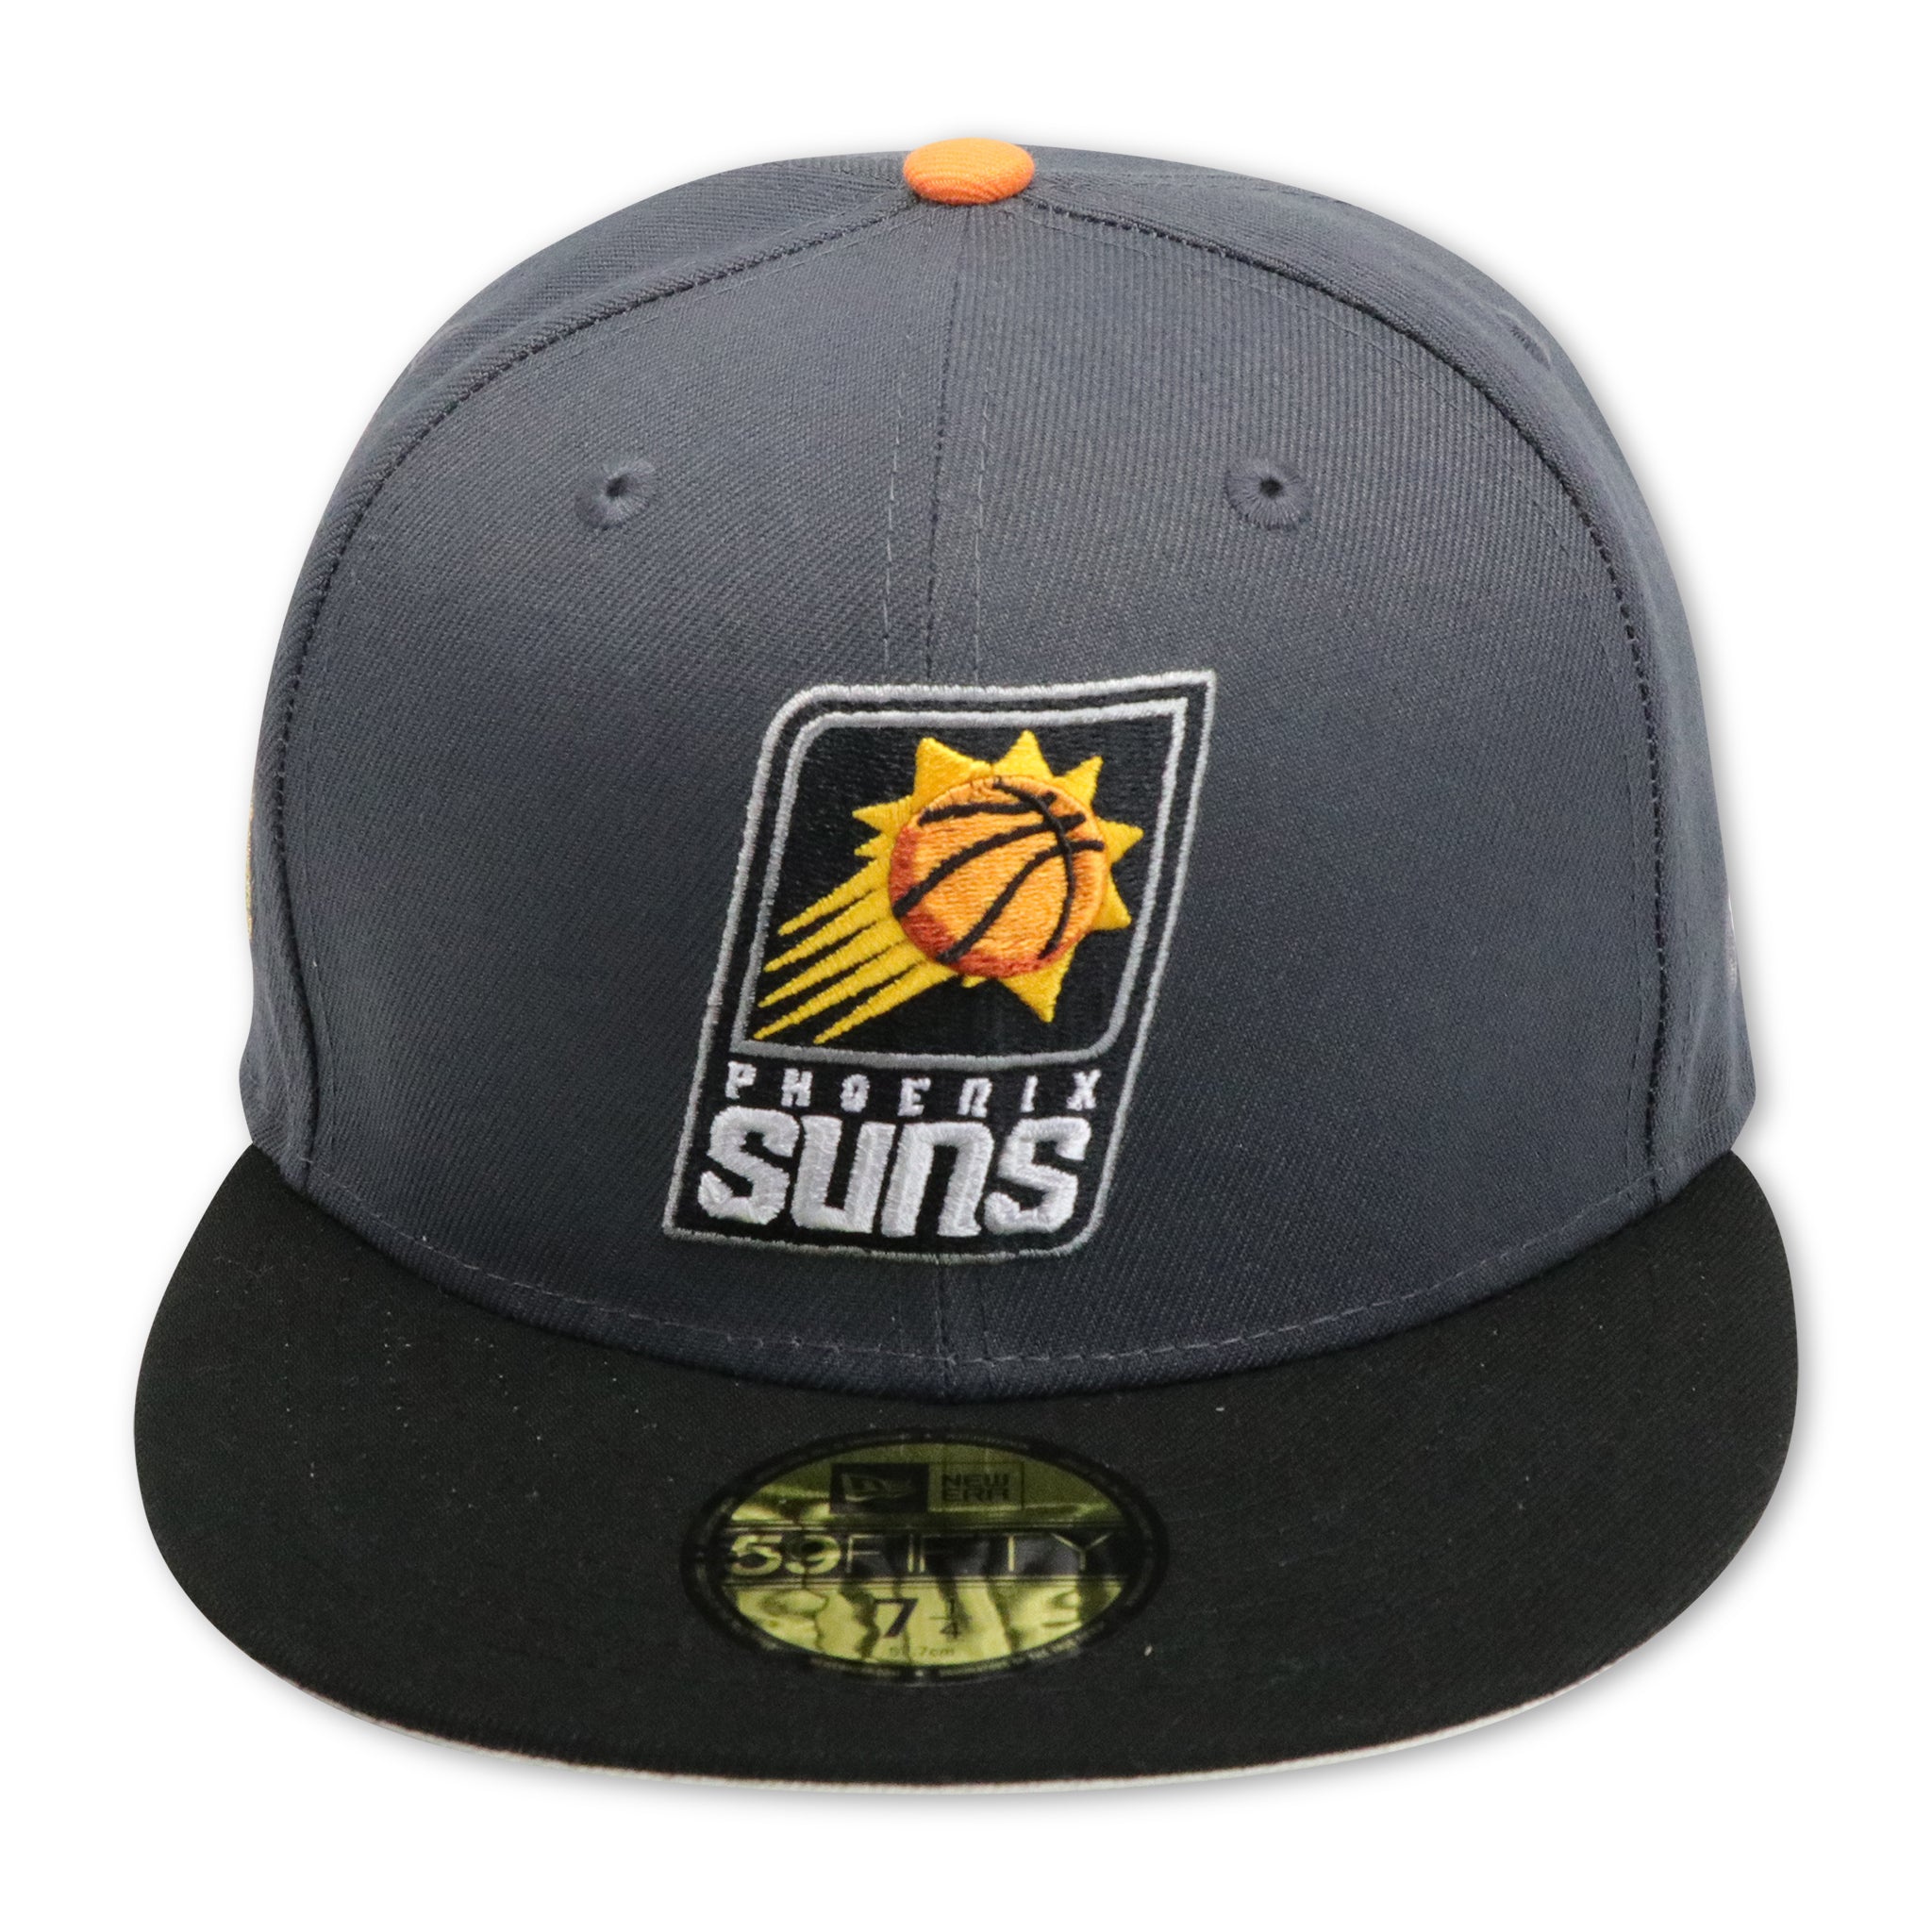 PHOENIX SUNS NEW ERA 59FIFTY FITTED (OFF-WHITE UNDER VISOR)